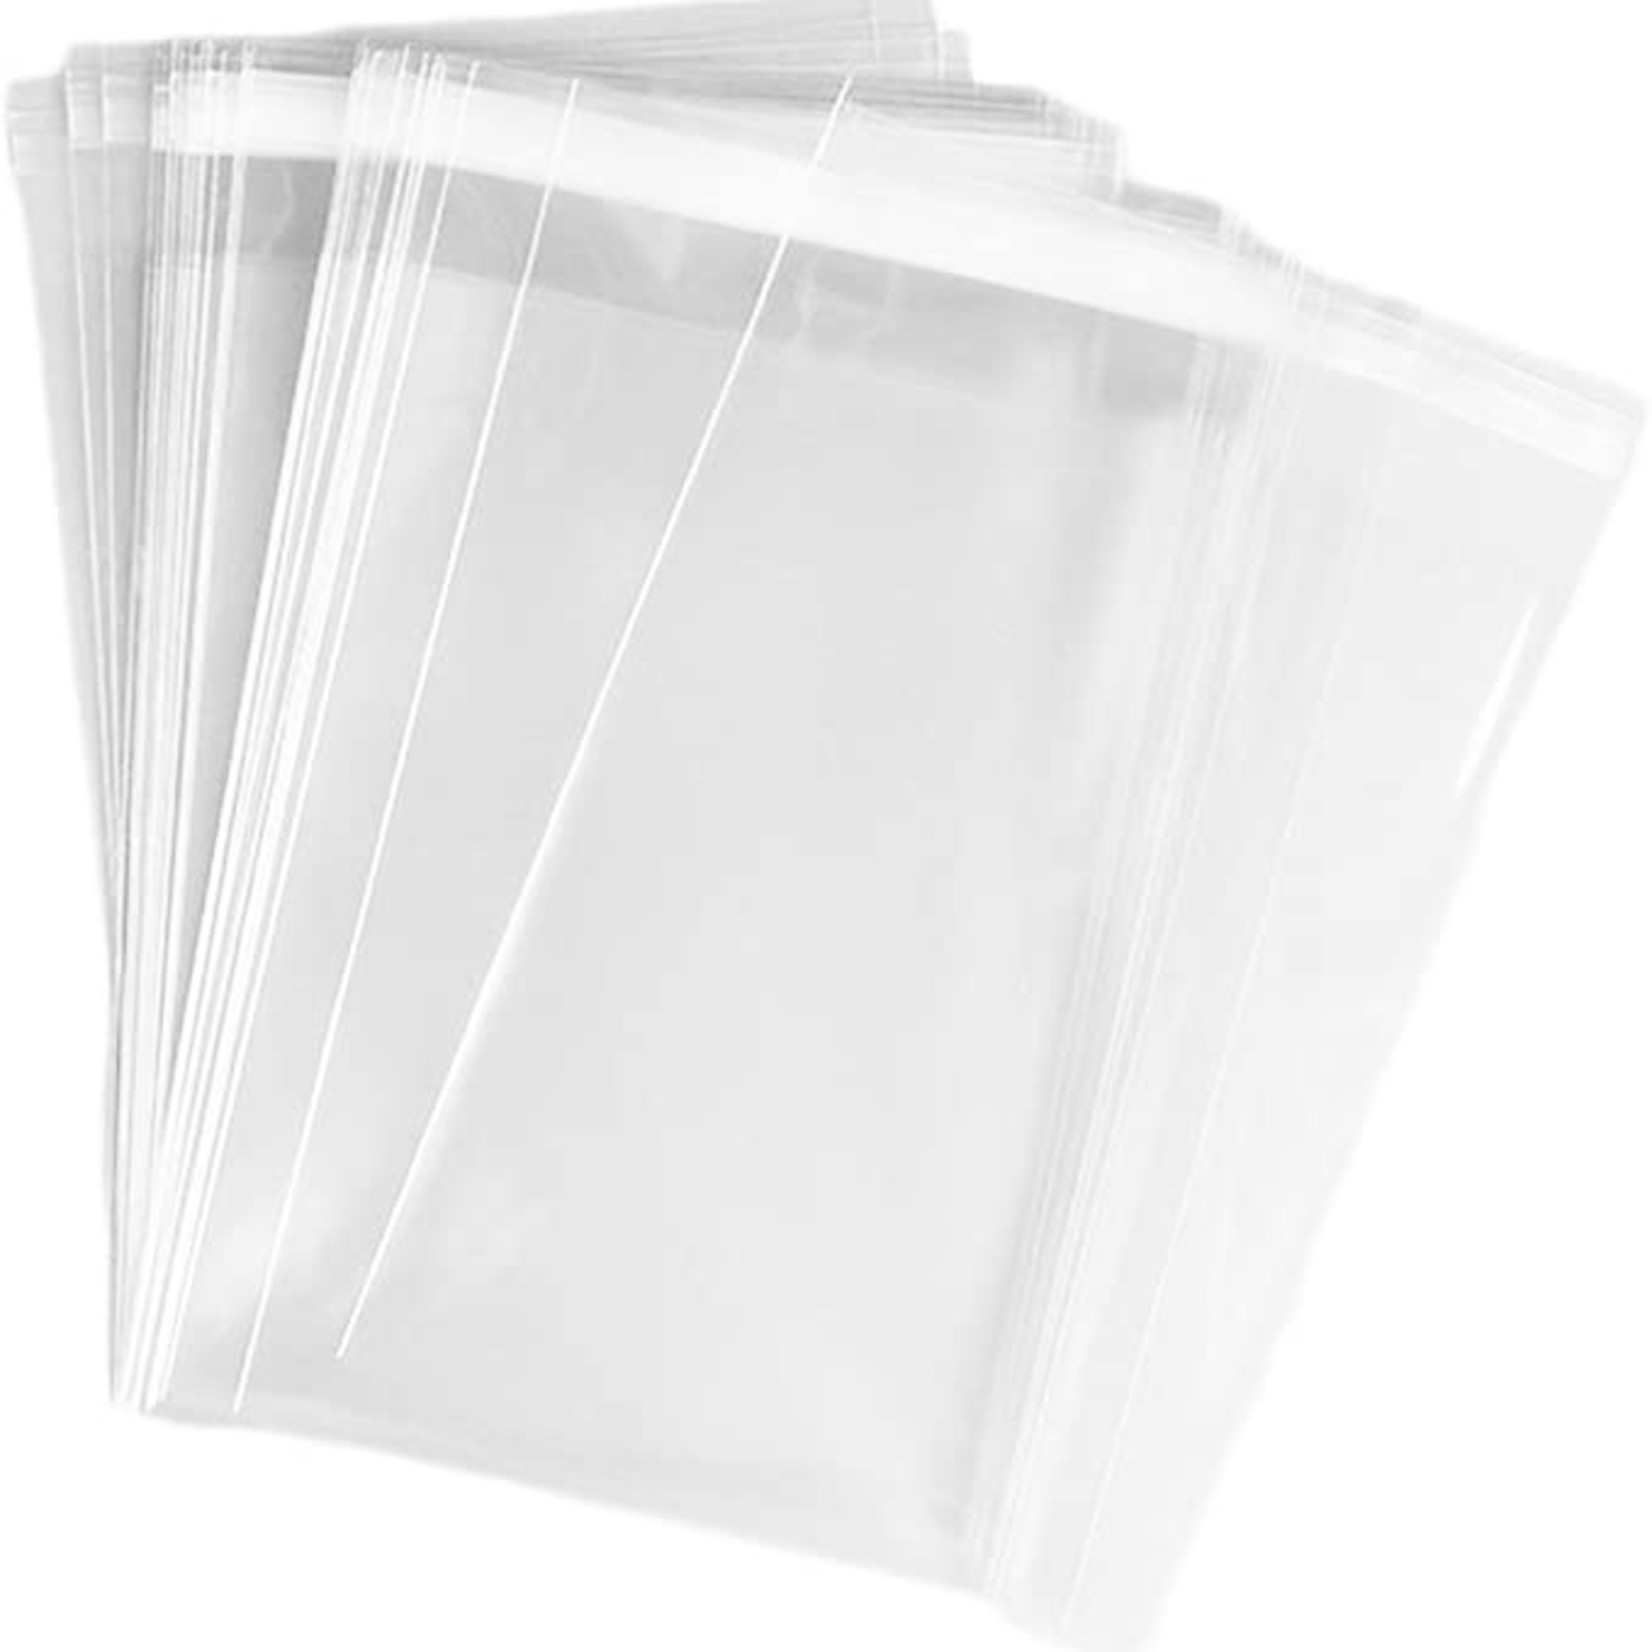 CLEAR BAGS - VARIOUS SIZES